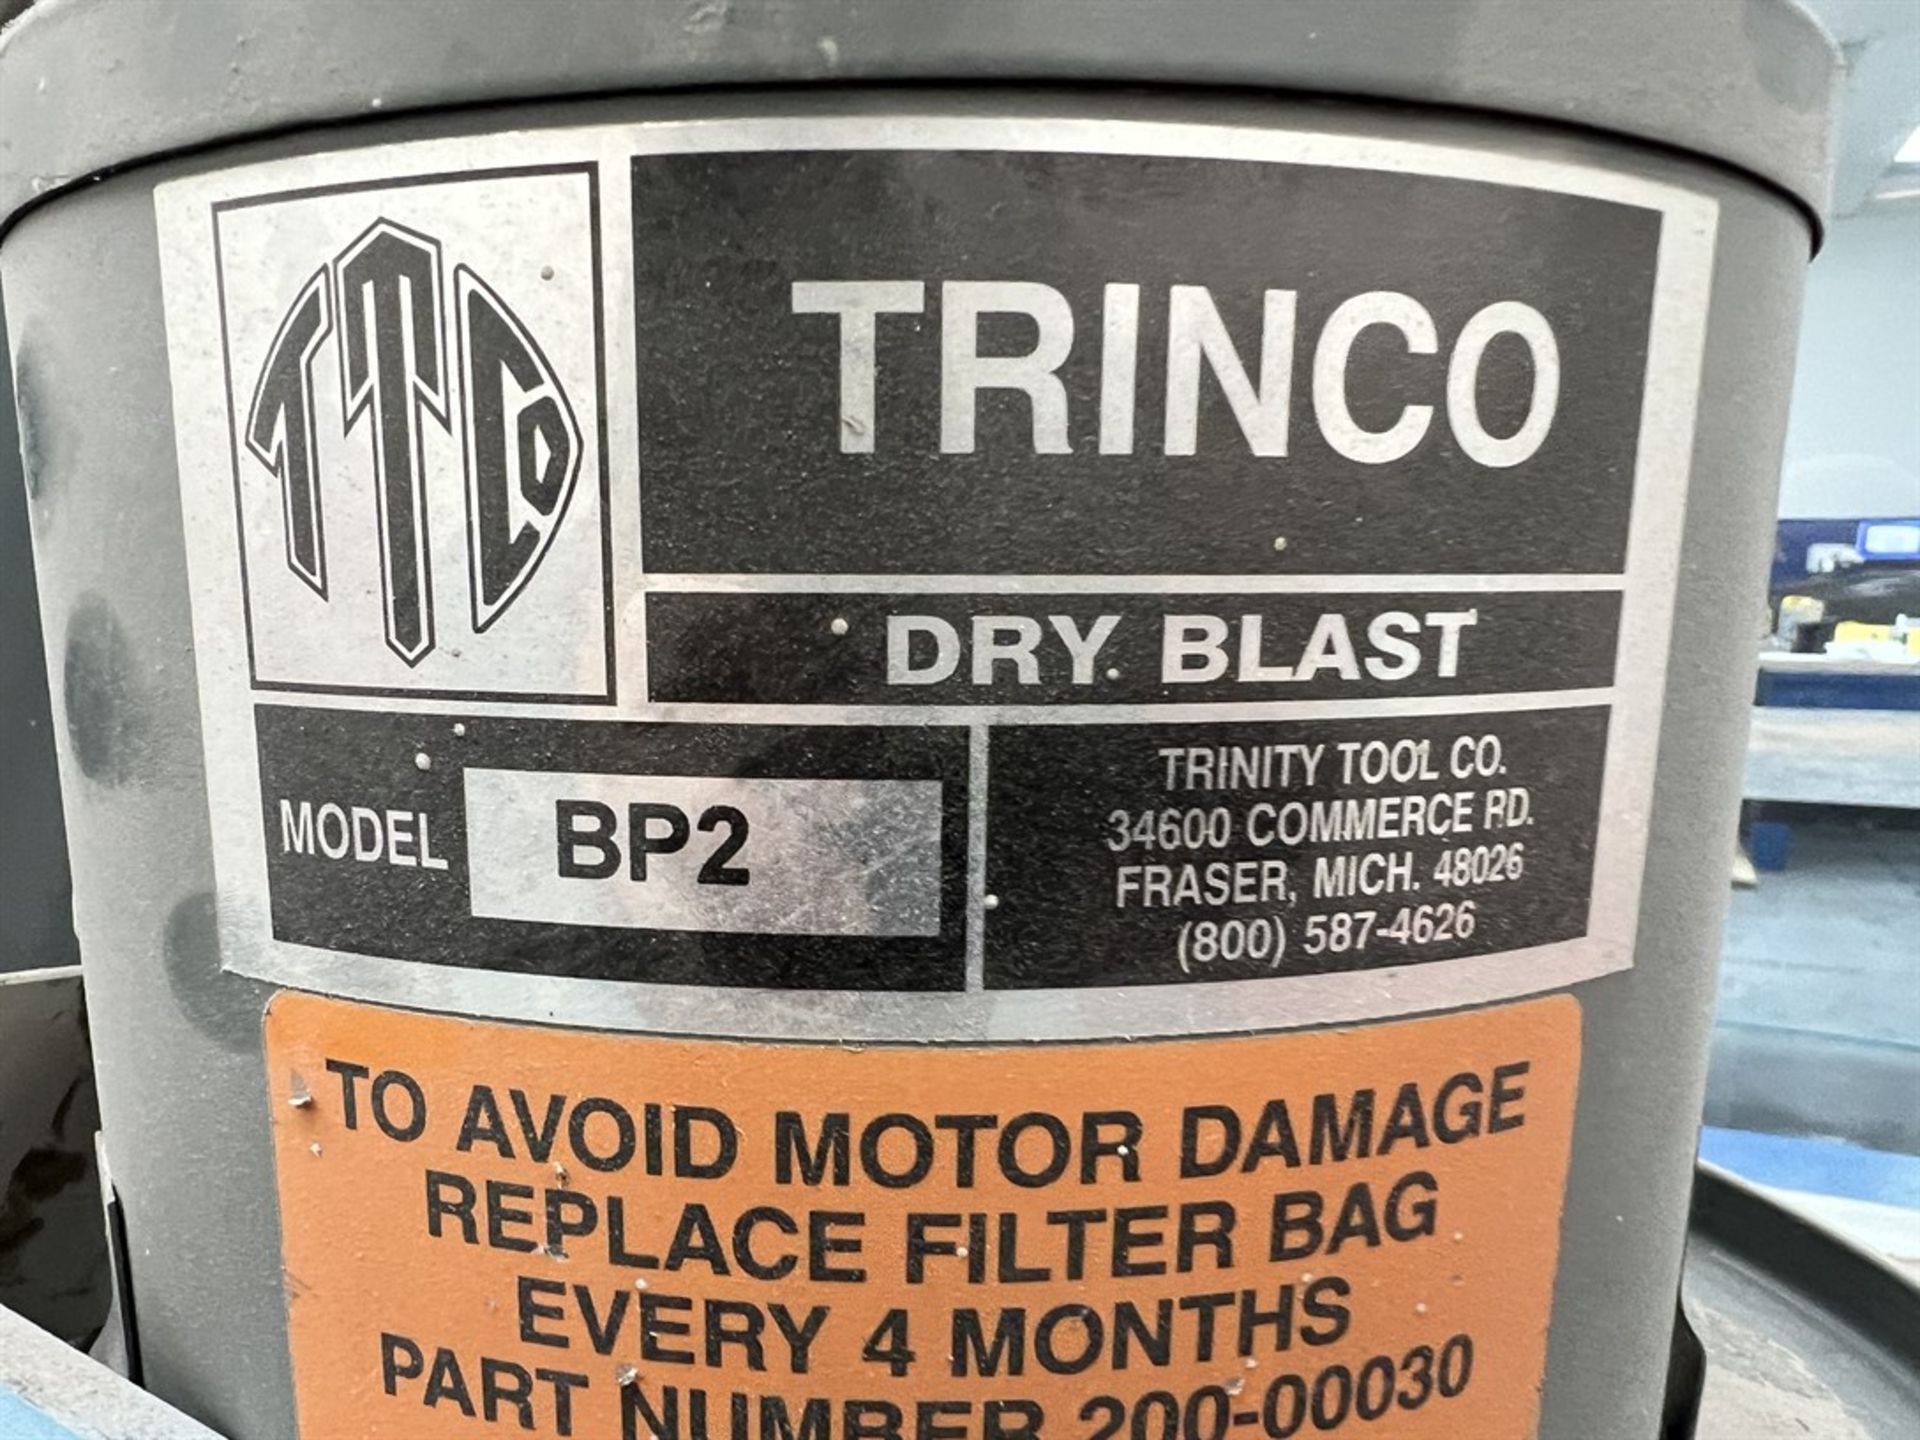 TRINCO 24/BP Dry Blast Cabinet, s/n 61301-5, w/ BP2 Collection System - Image 6 of 6